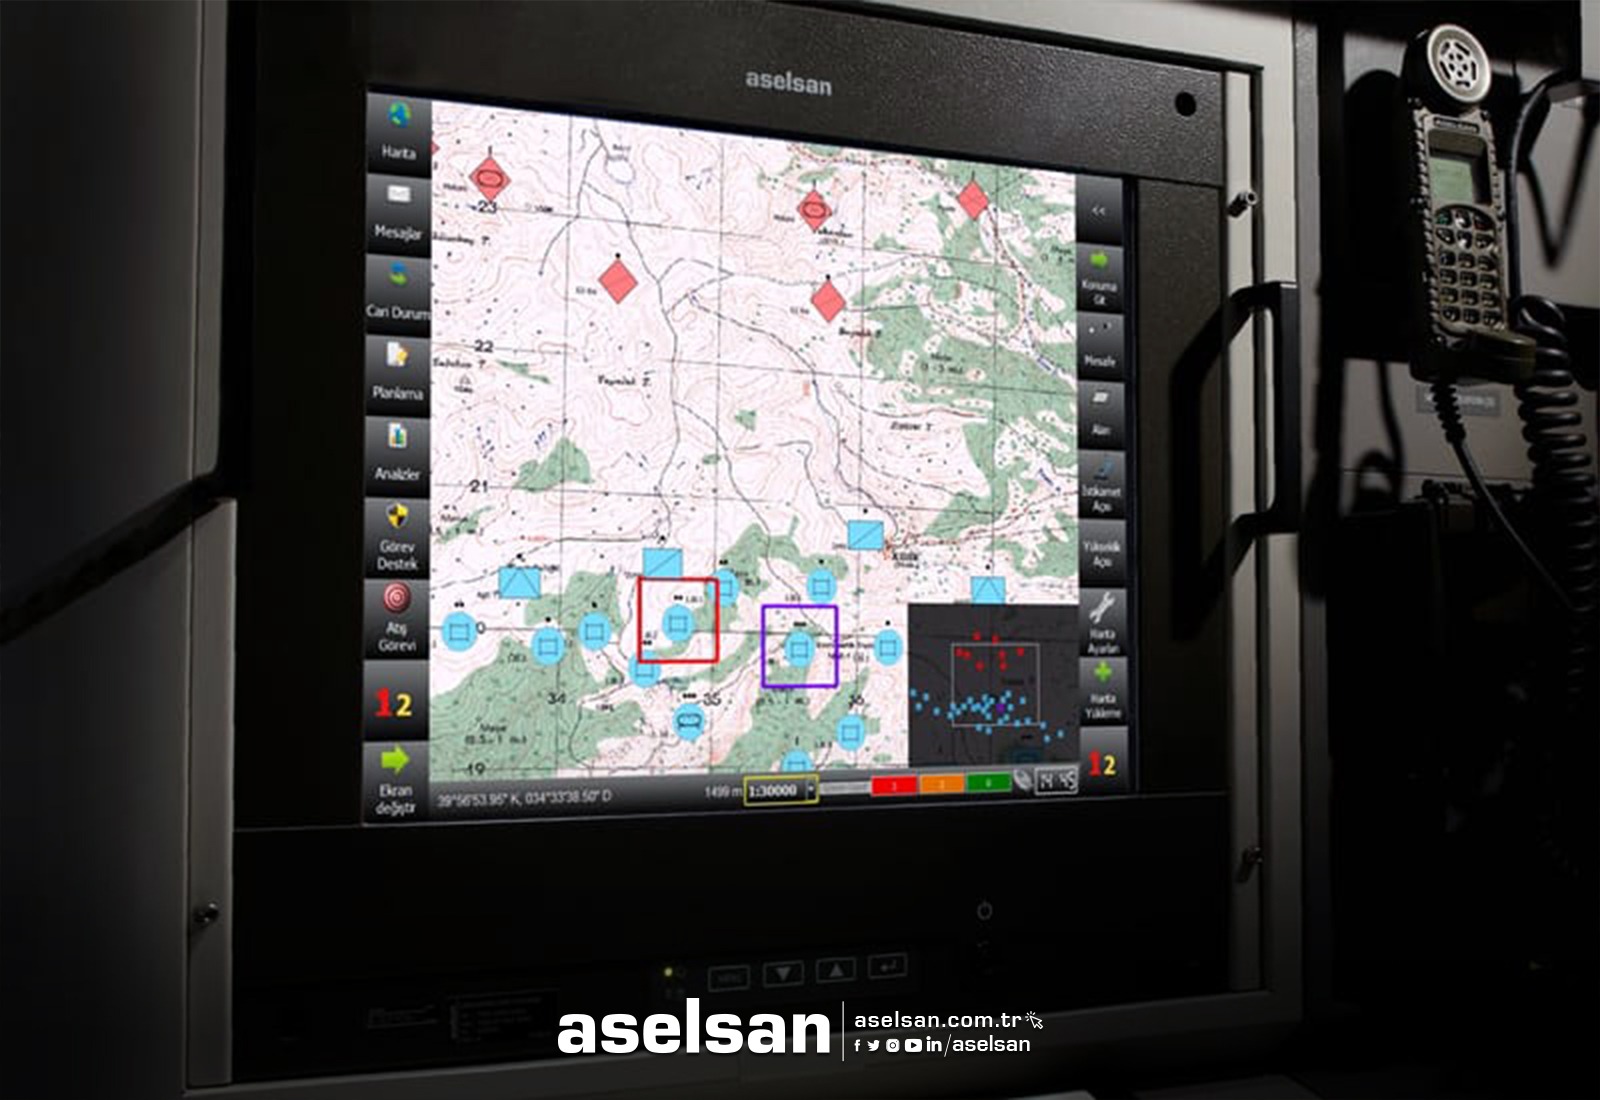 Aselsan Awarded $93.2 Million Contract to Supply Anti-Tank Systems